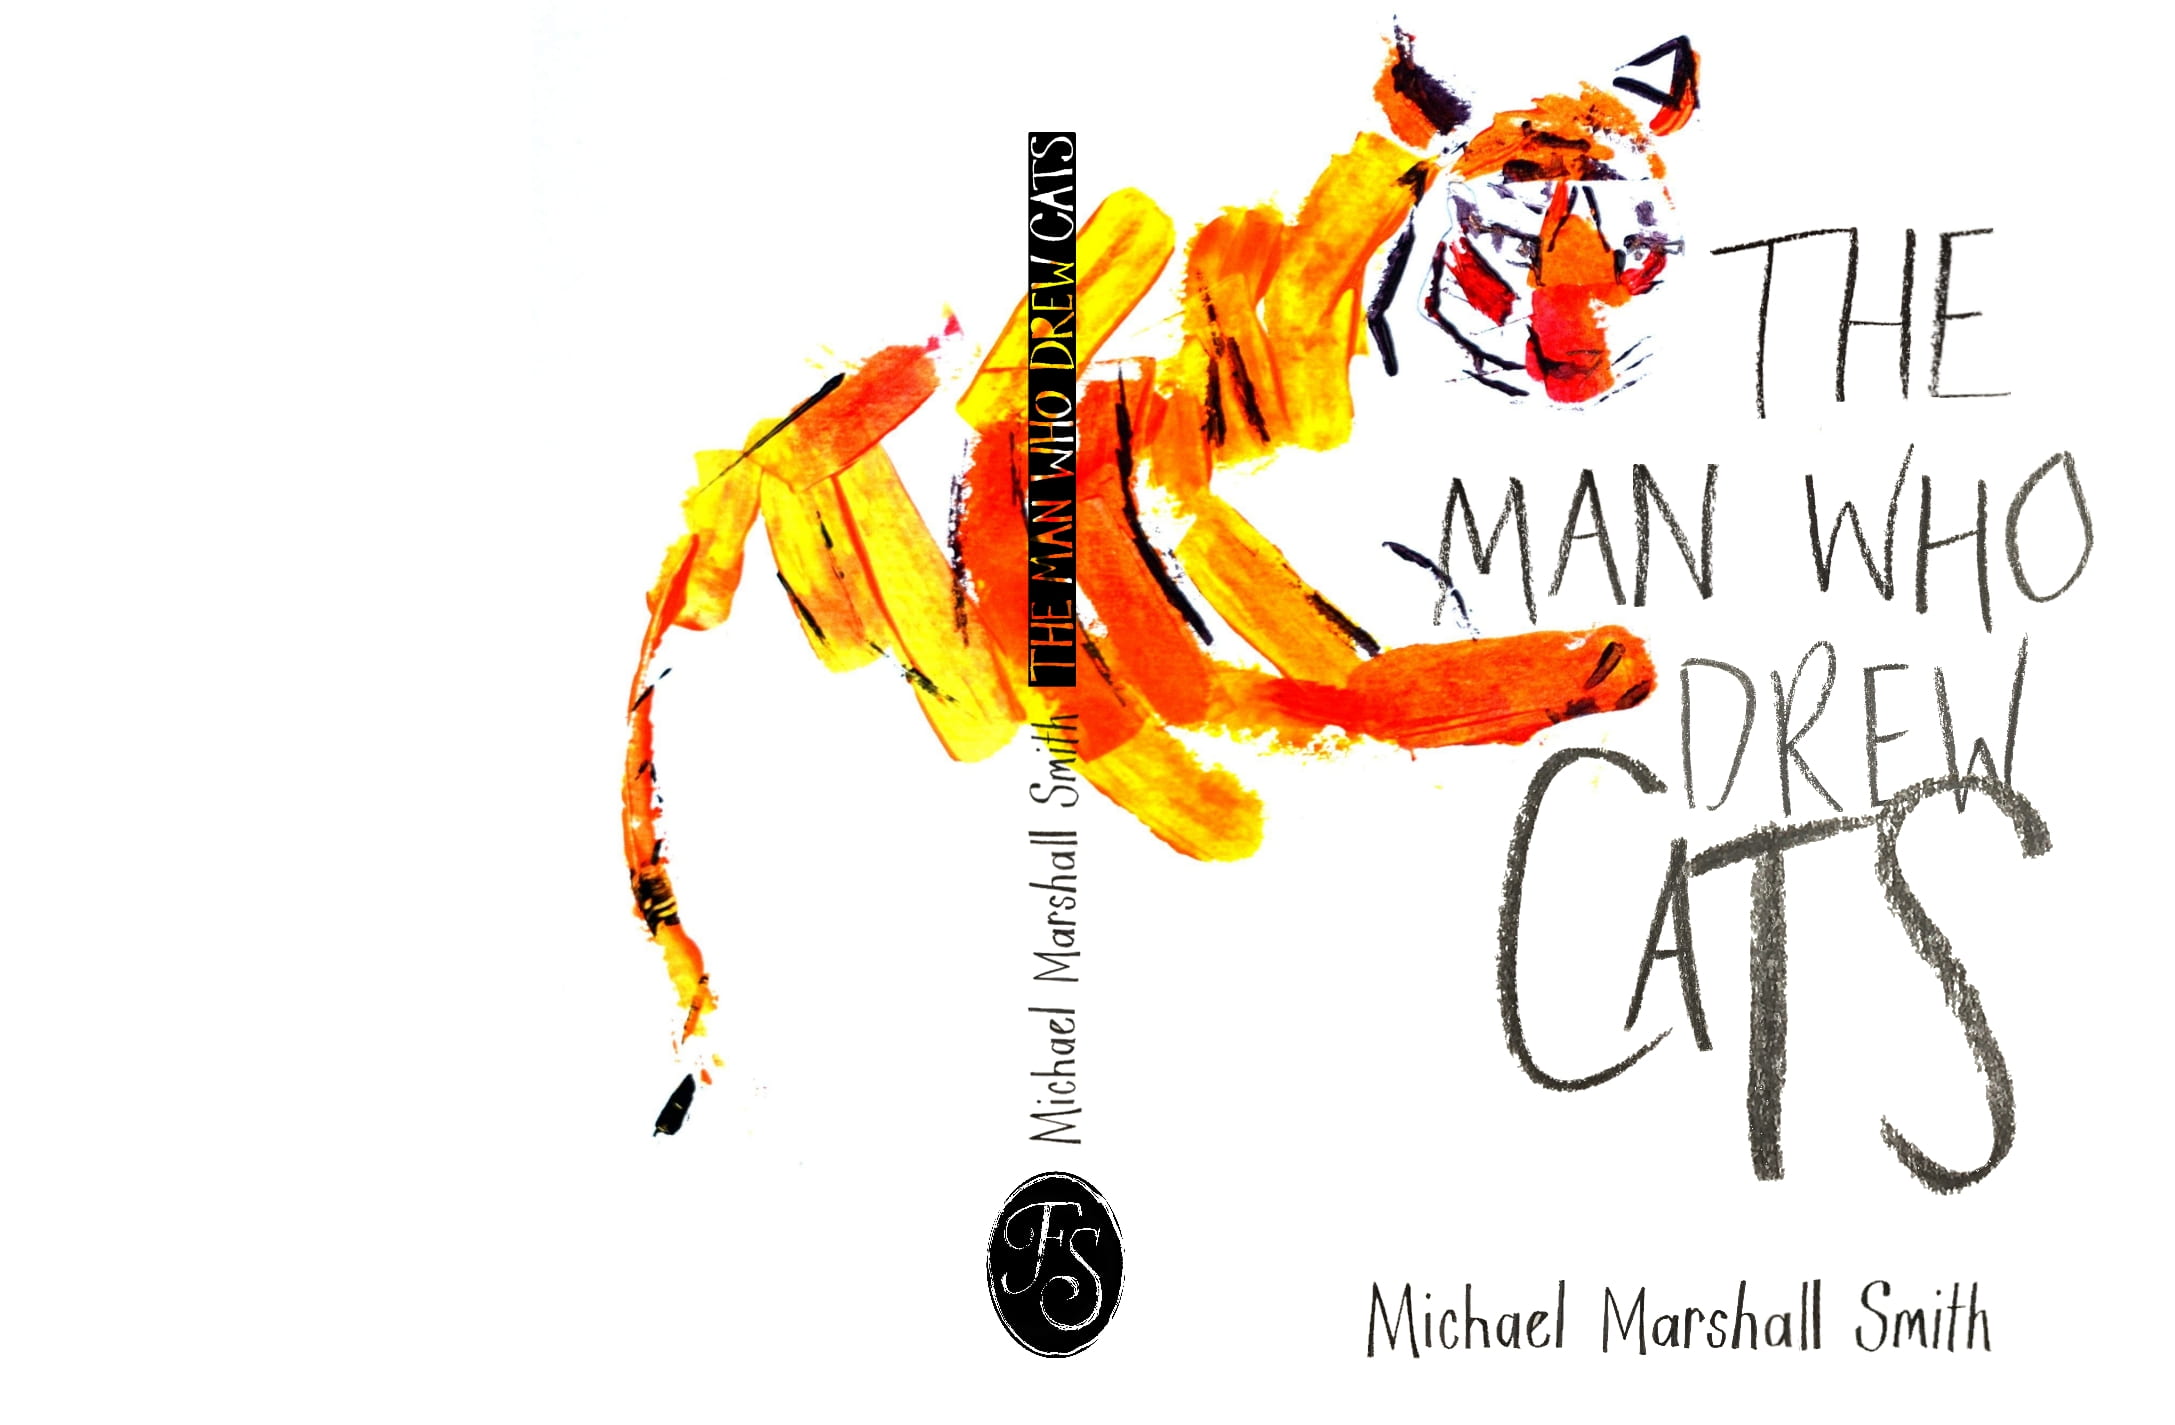 Illustration of a tiger wit the title 'The man who drew cats'.